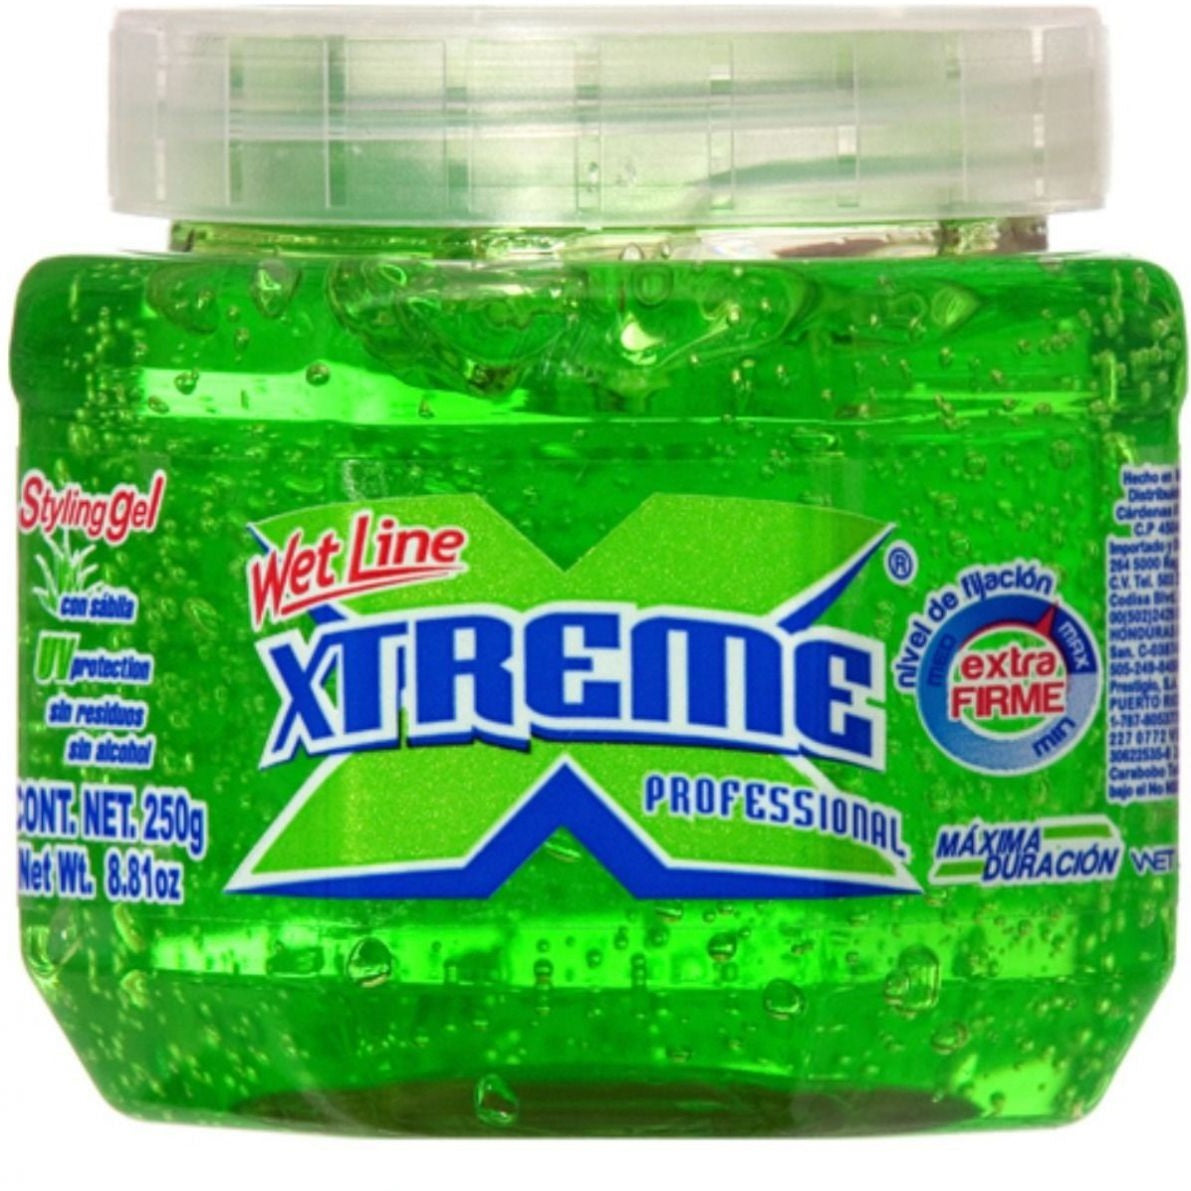 Wet Line Xtreme Professional Styling Gel Extra Hold Green 8,8 Oz / 250 Ml 